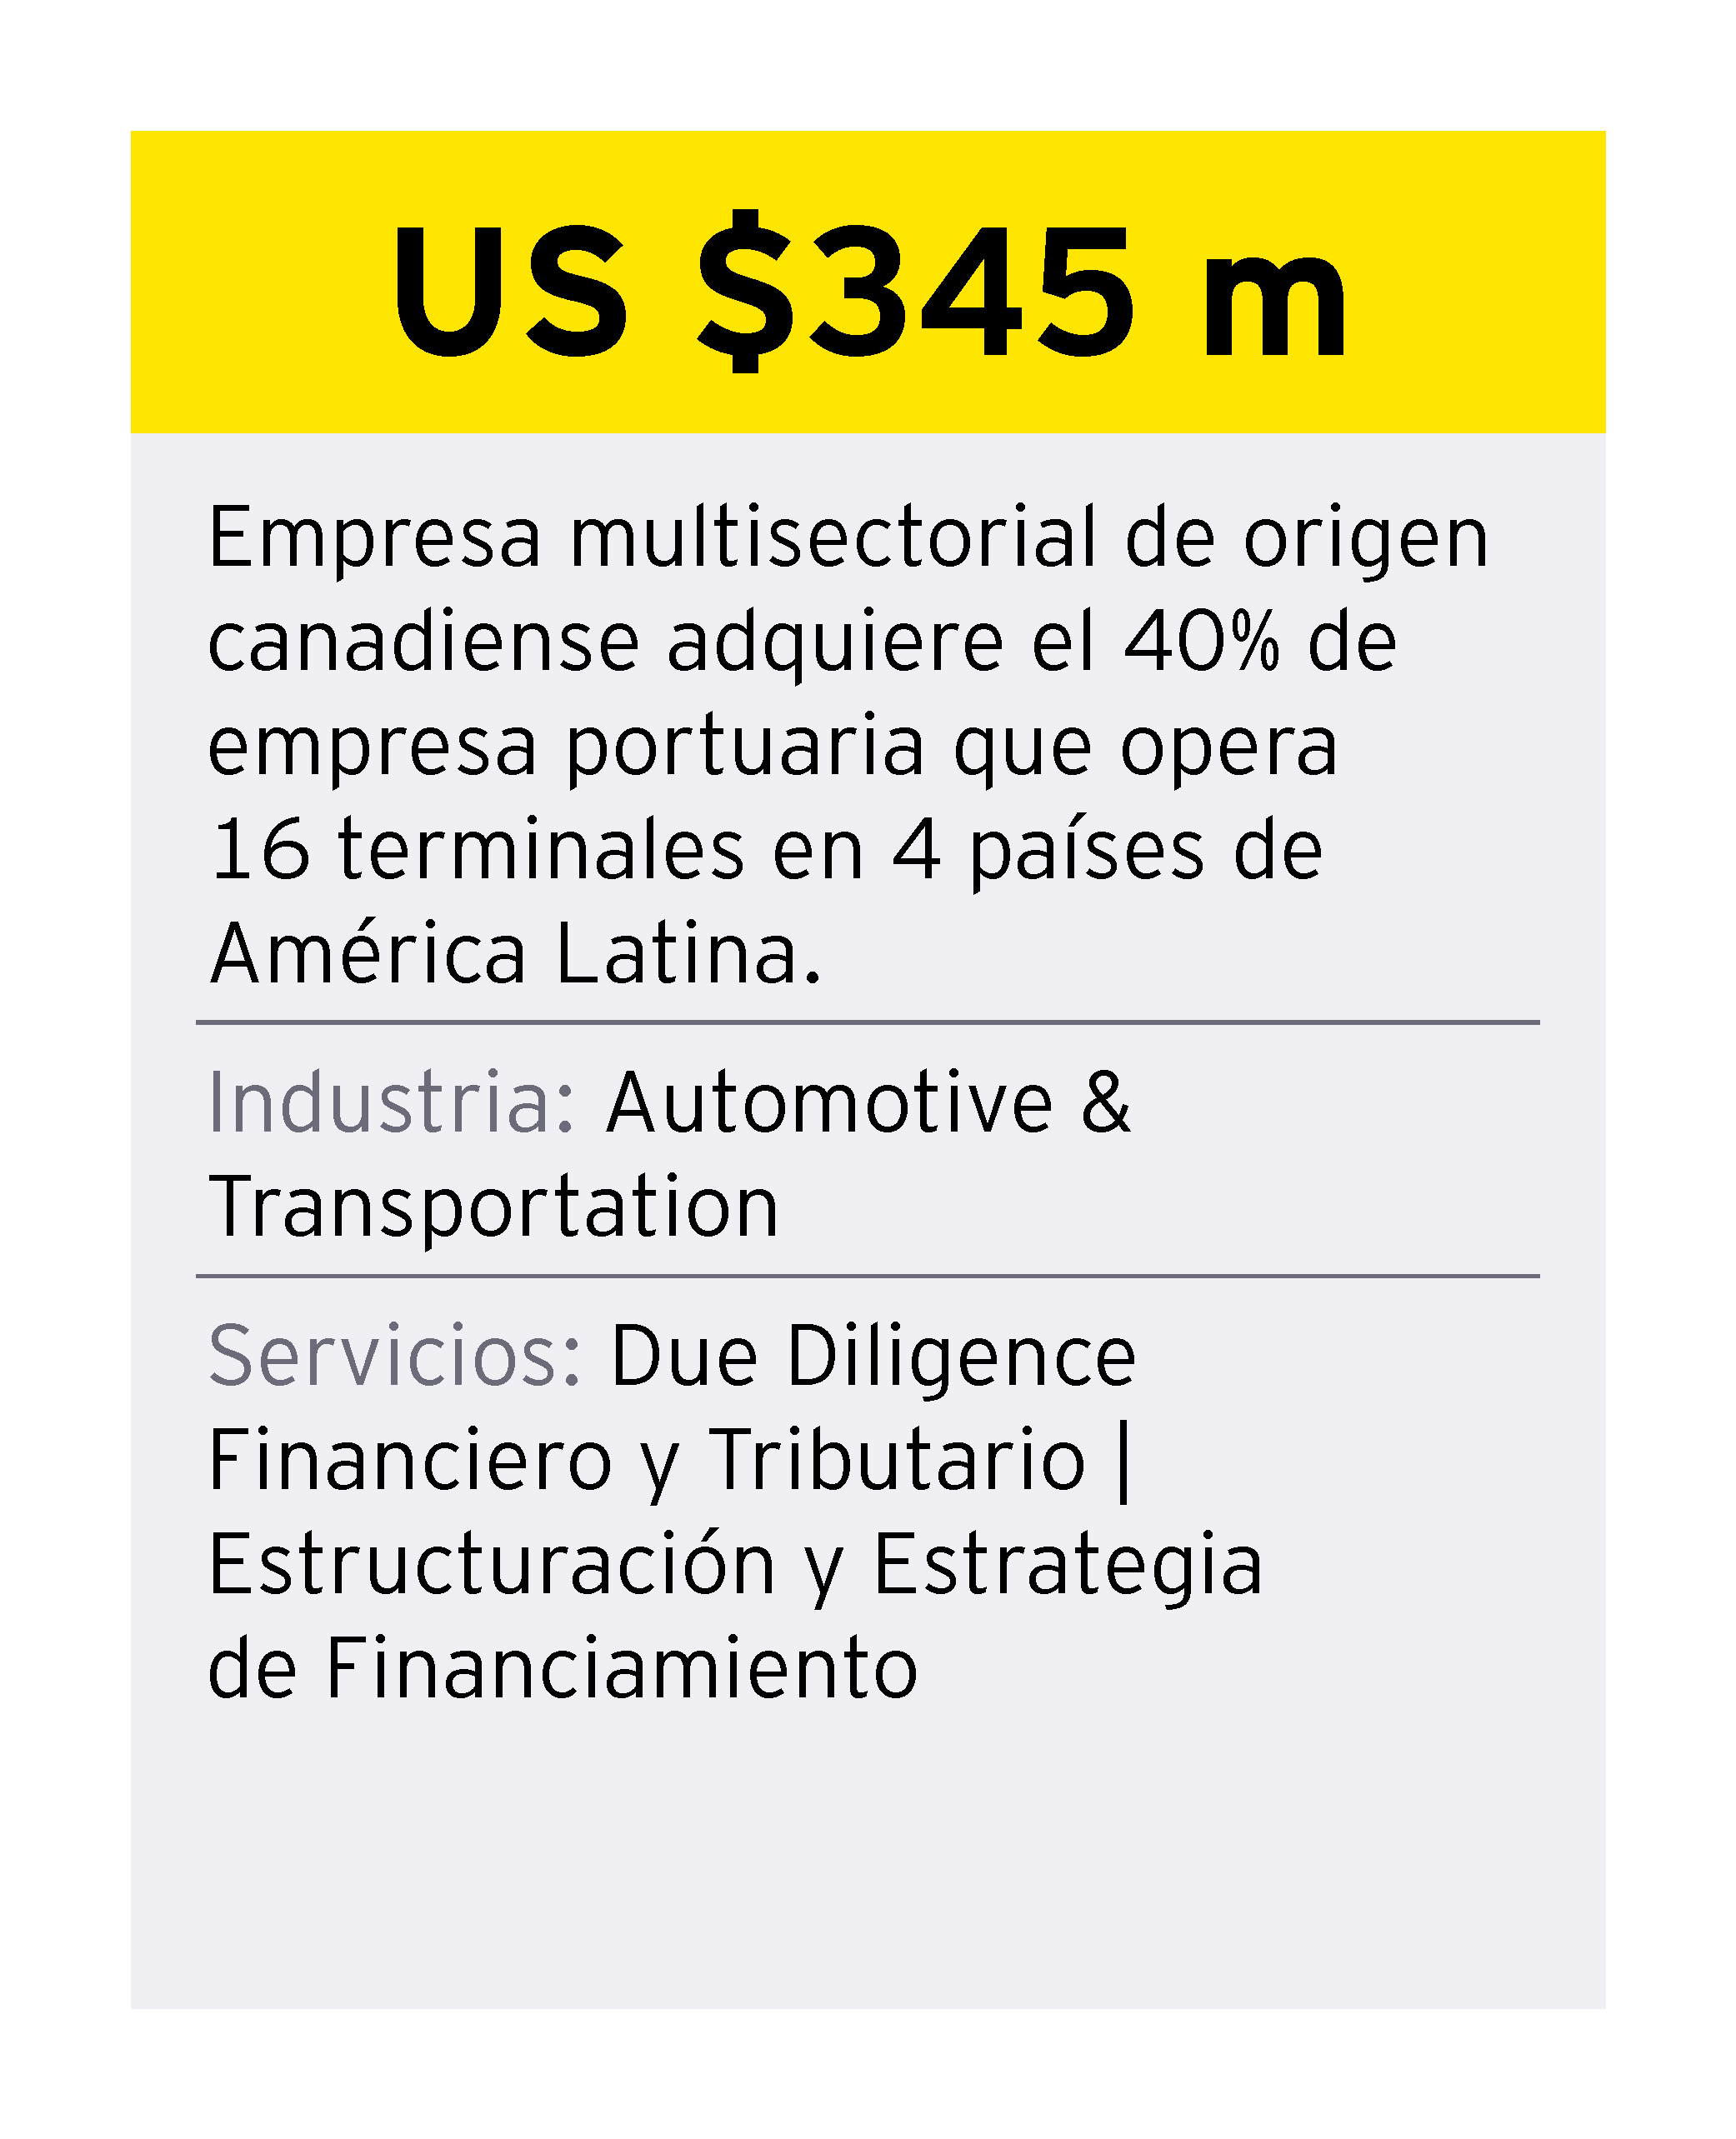 ey-chile-credencial-6-services